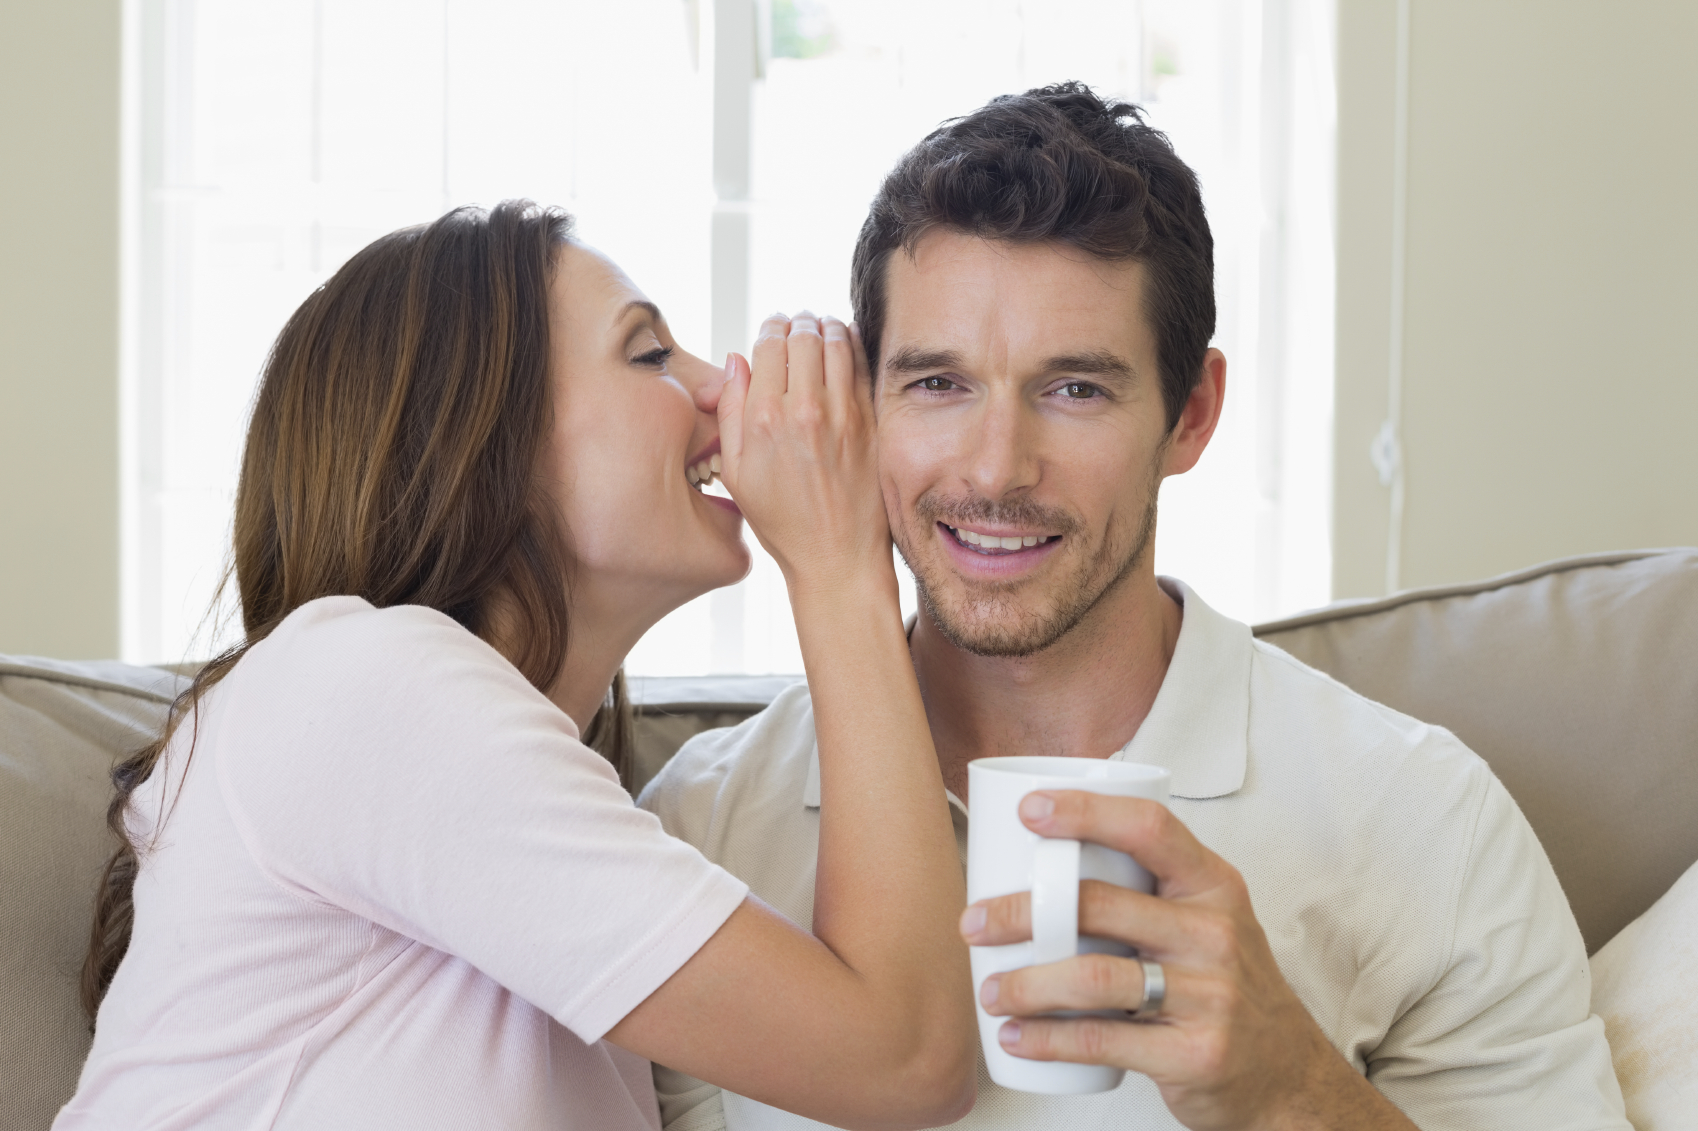 7 Things Every Husband Longs To Hear From His Wife